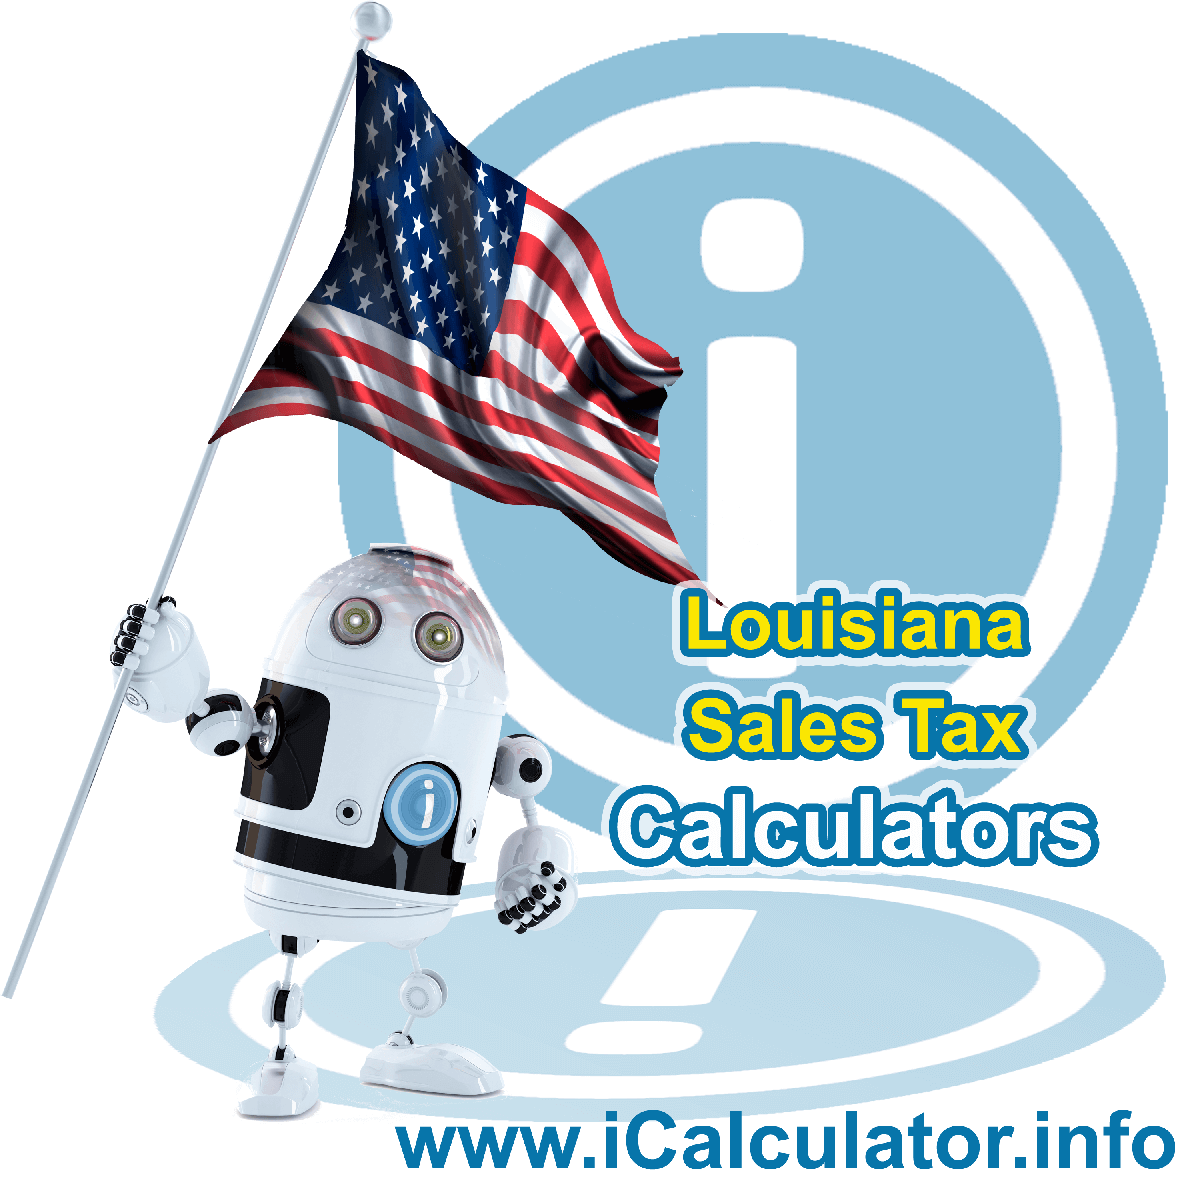 Louisiana Sales Tax Comparison Calculator: This image illustrates a calculator robot comparing sales tax in Louisiana manually using the Louisiana Sales Tax Formula. You can use this information to compare Sales Tax manually or use the Louisiana Sales Tax Comparison Calculator to calculate and compare Louisiana sales tax online.